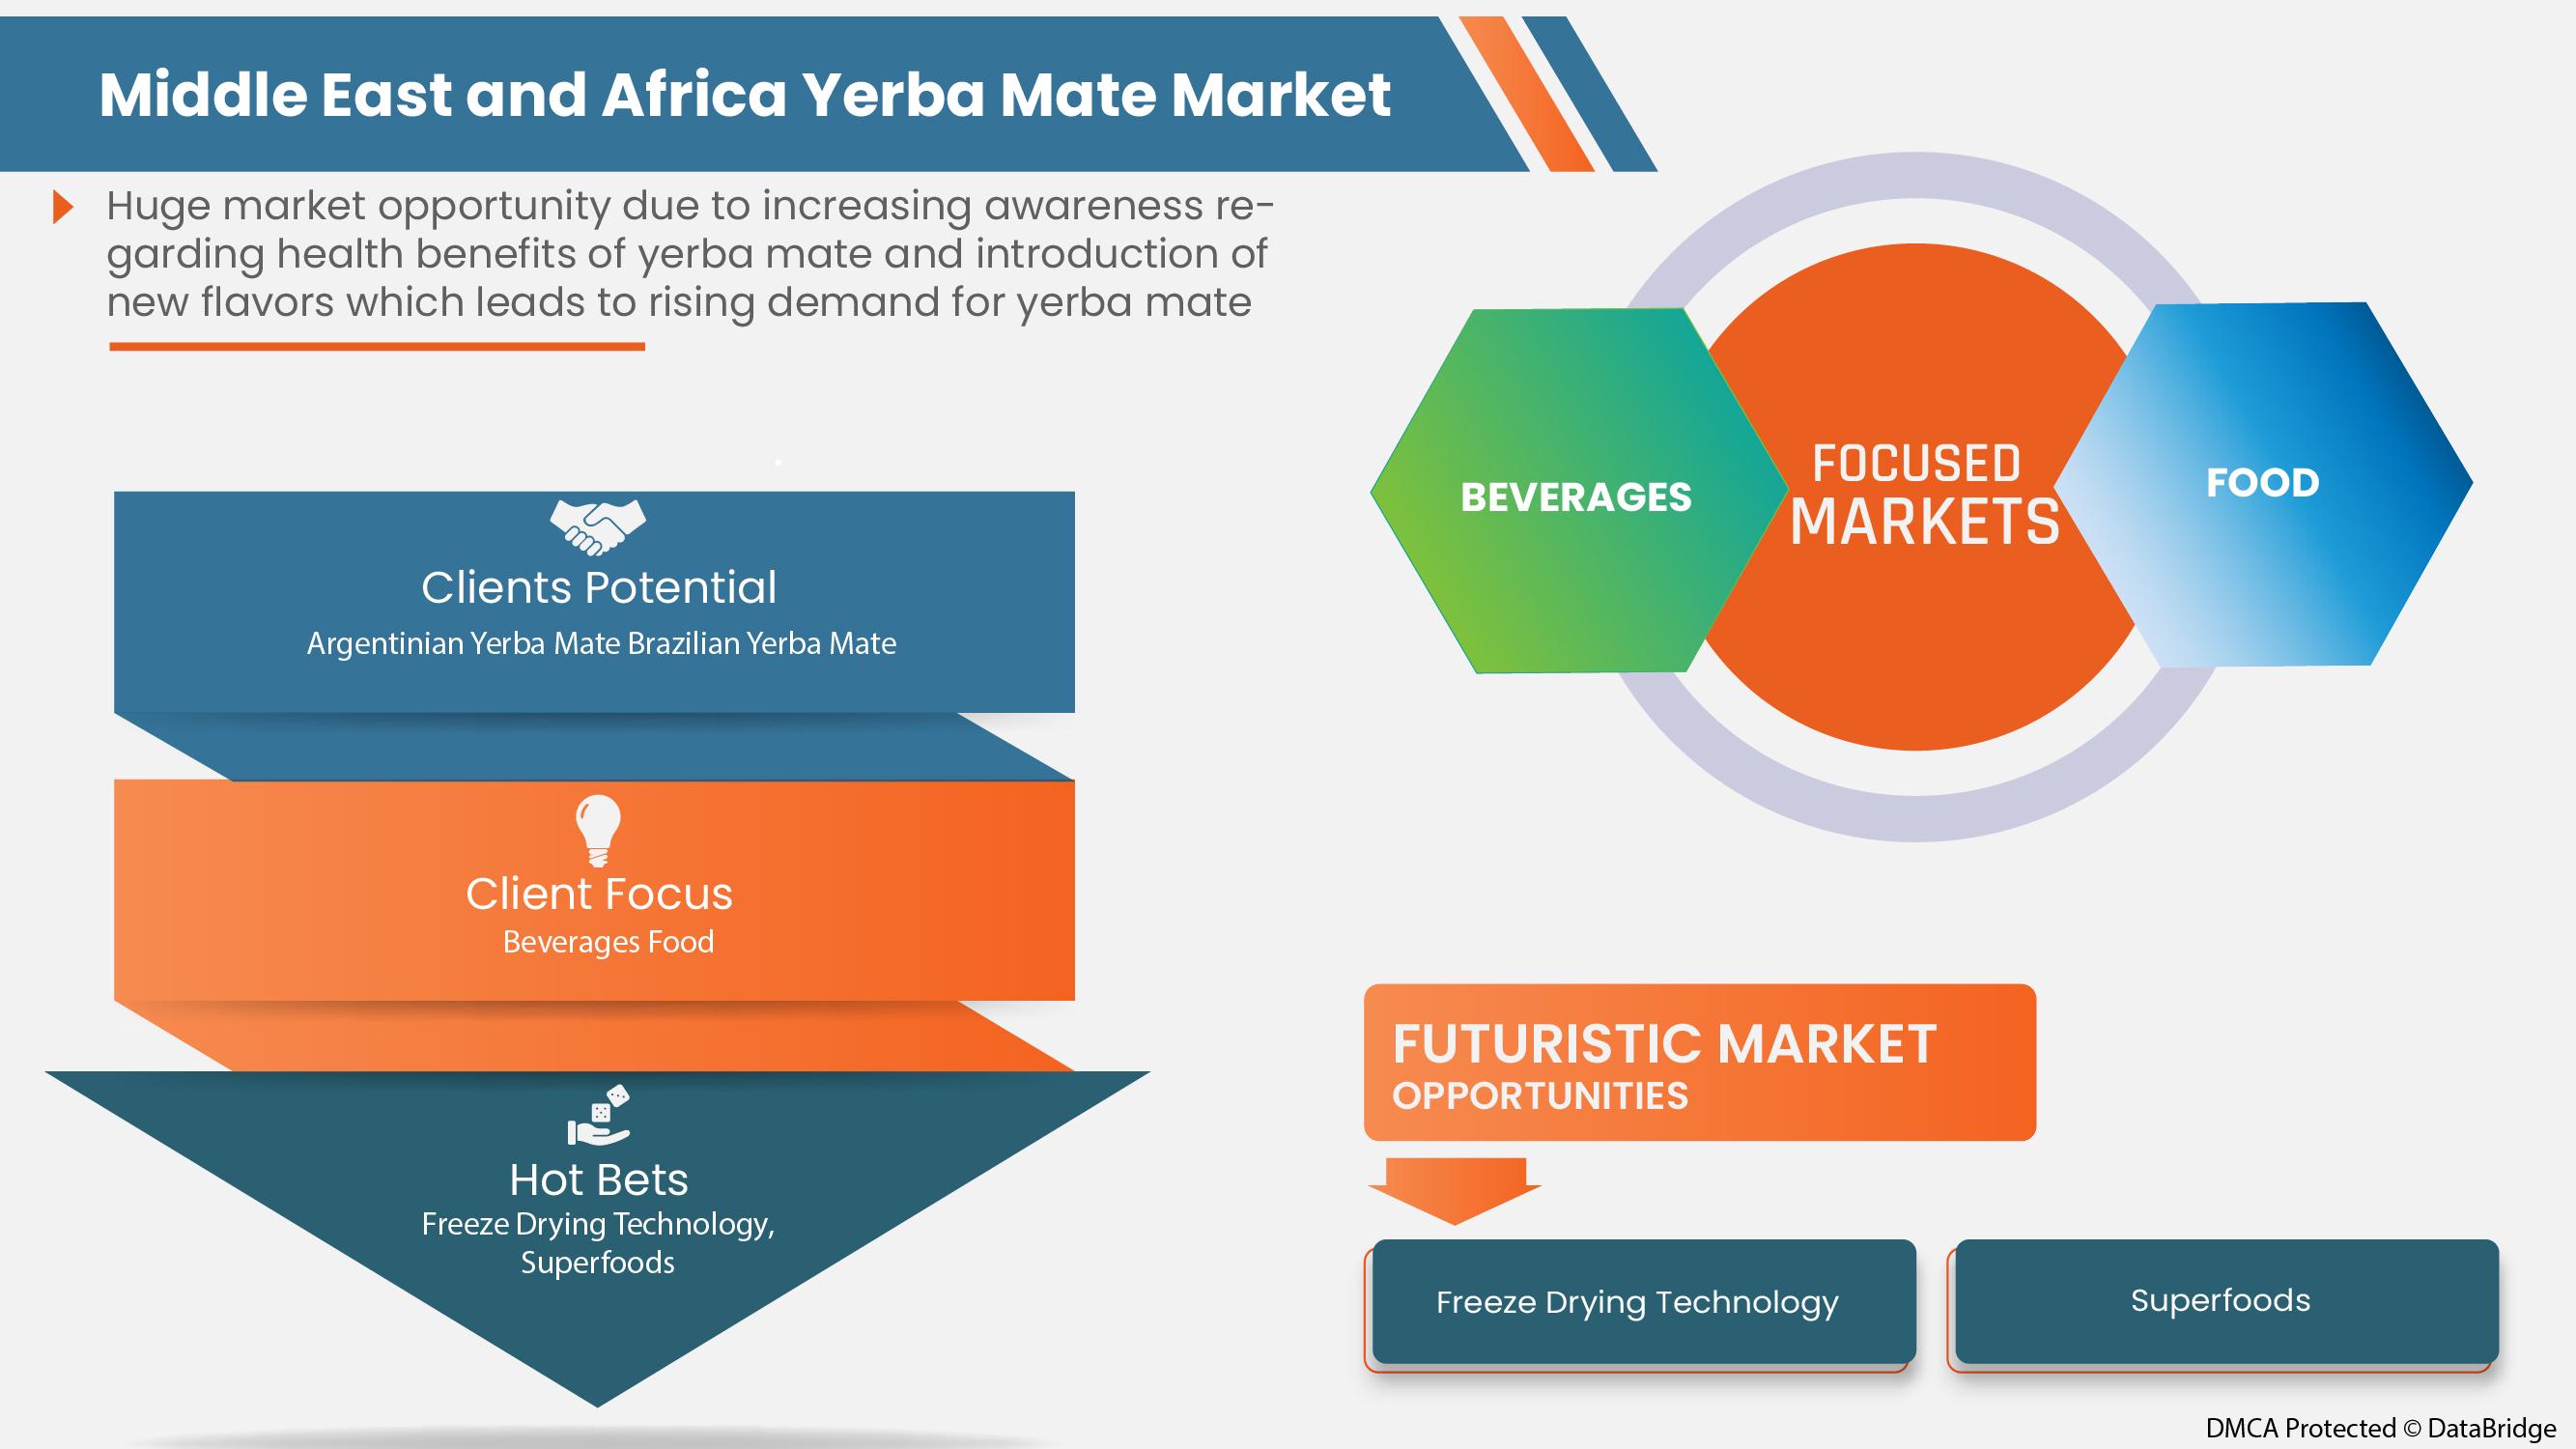 Middle East and Africa Yerba Mate Market